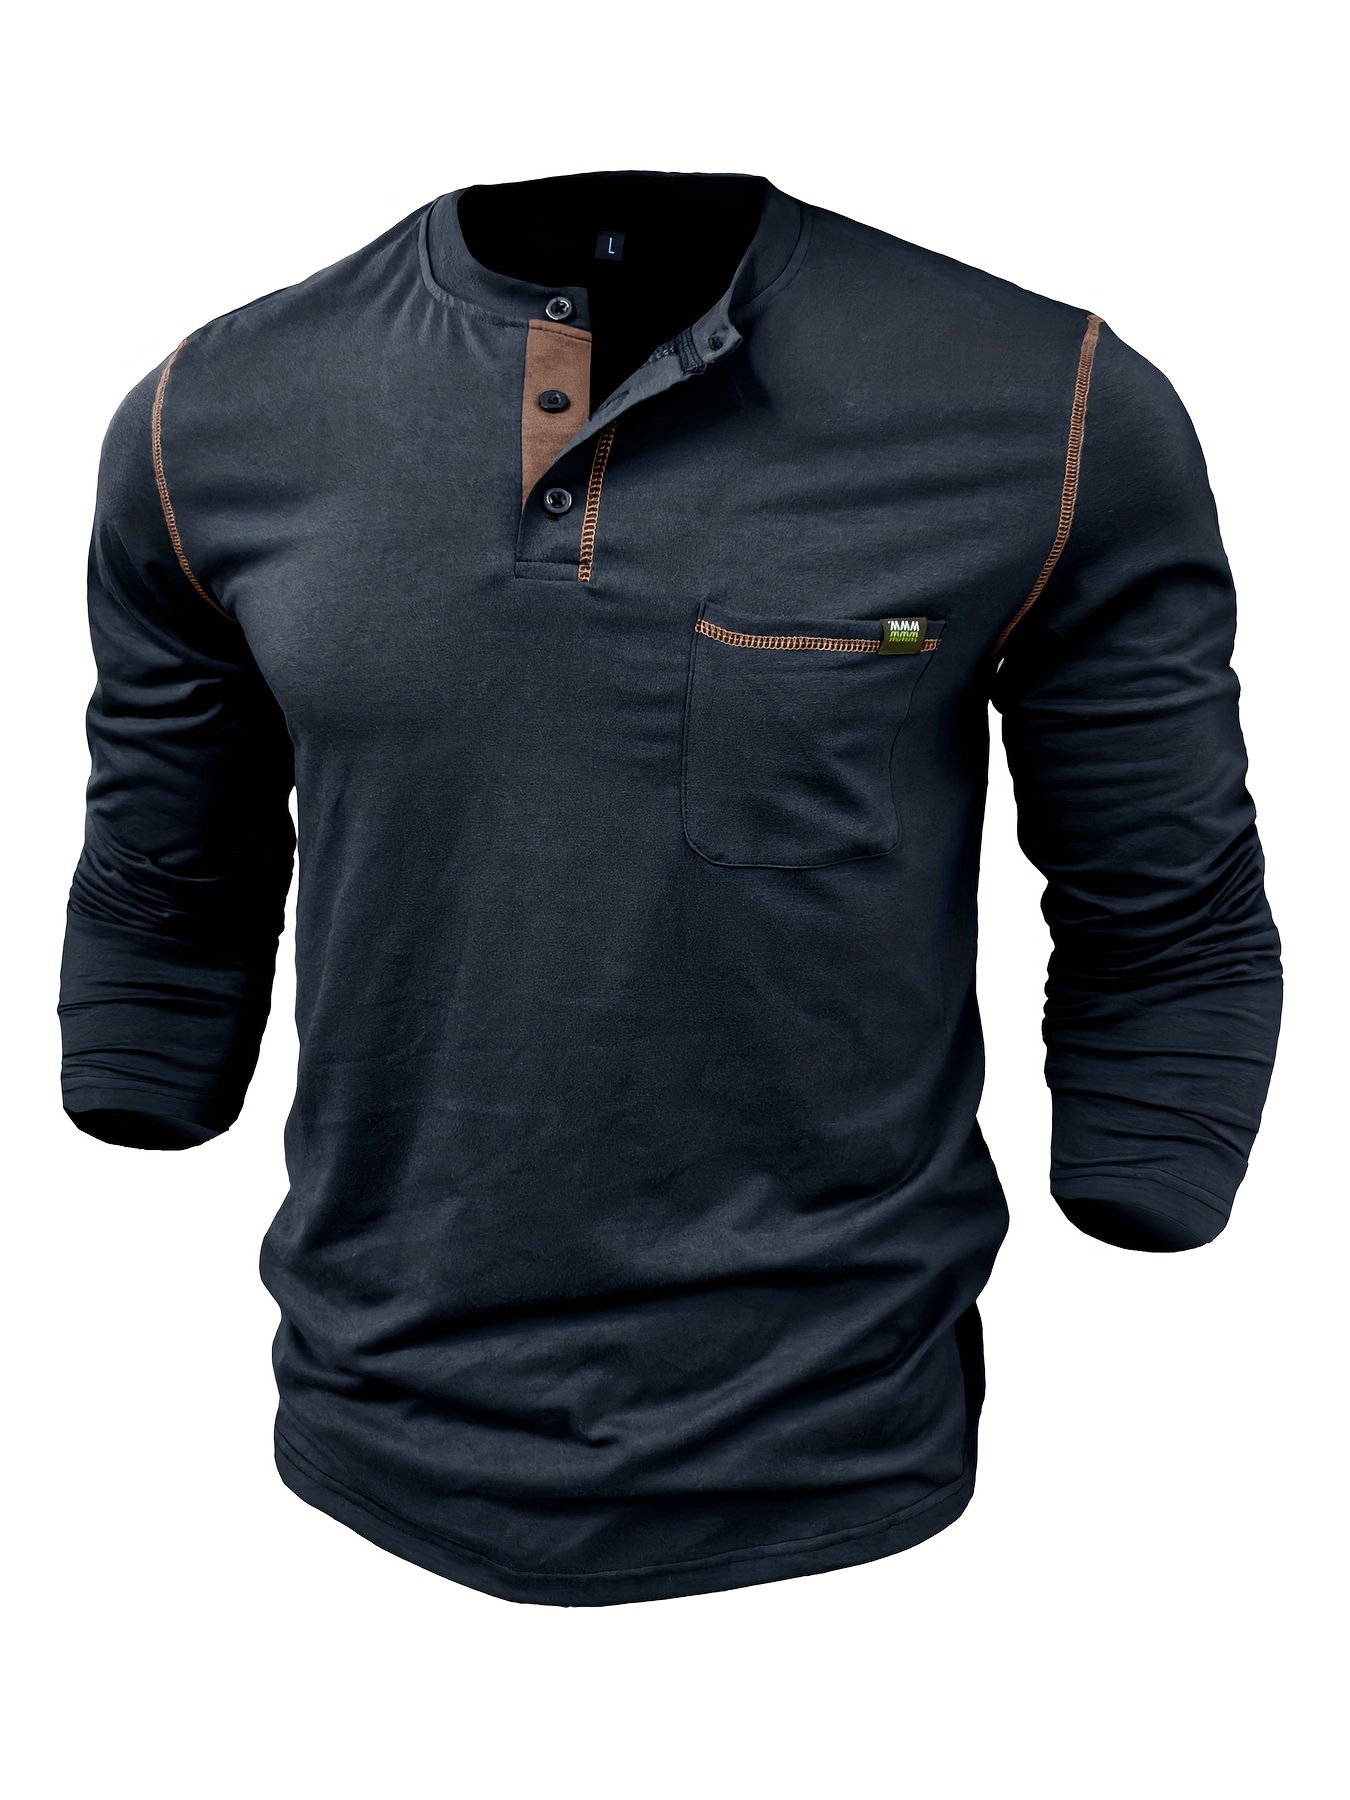  Men Vintage Henley Shirt Casual Slim Fit Long Sleeve Button Up  V-Neck Shirts Lightweight Active Jerseys Tee Big and Tall Black : Clothing,  Shoes & Jewelry